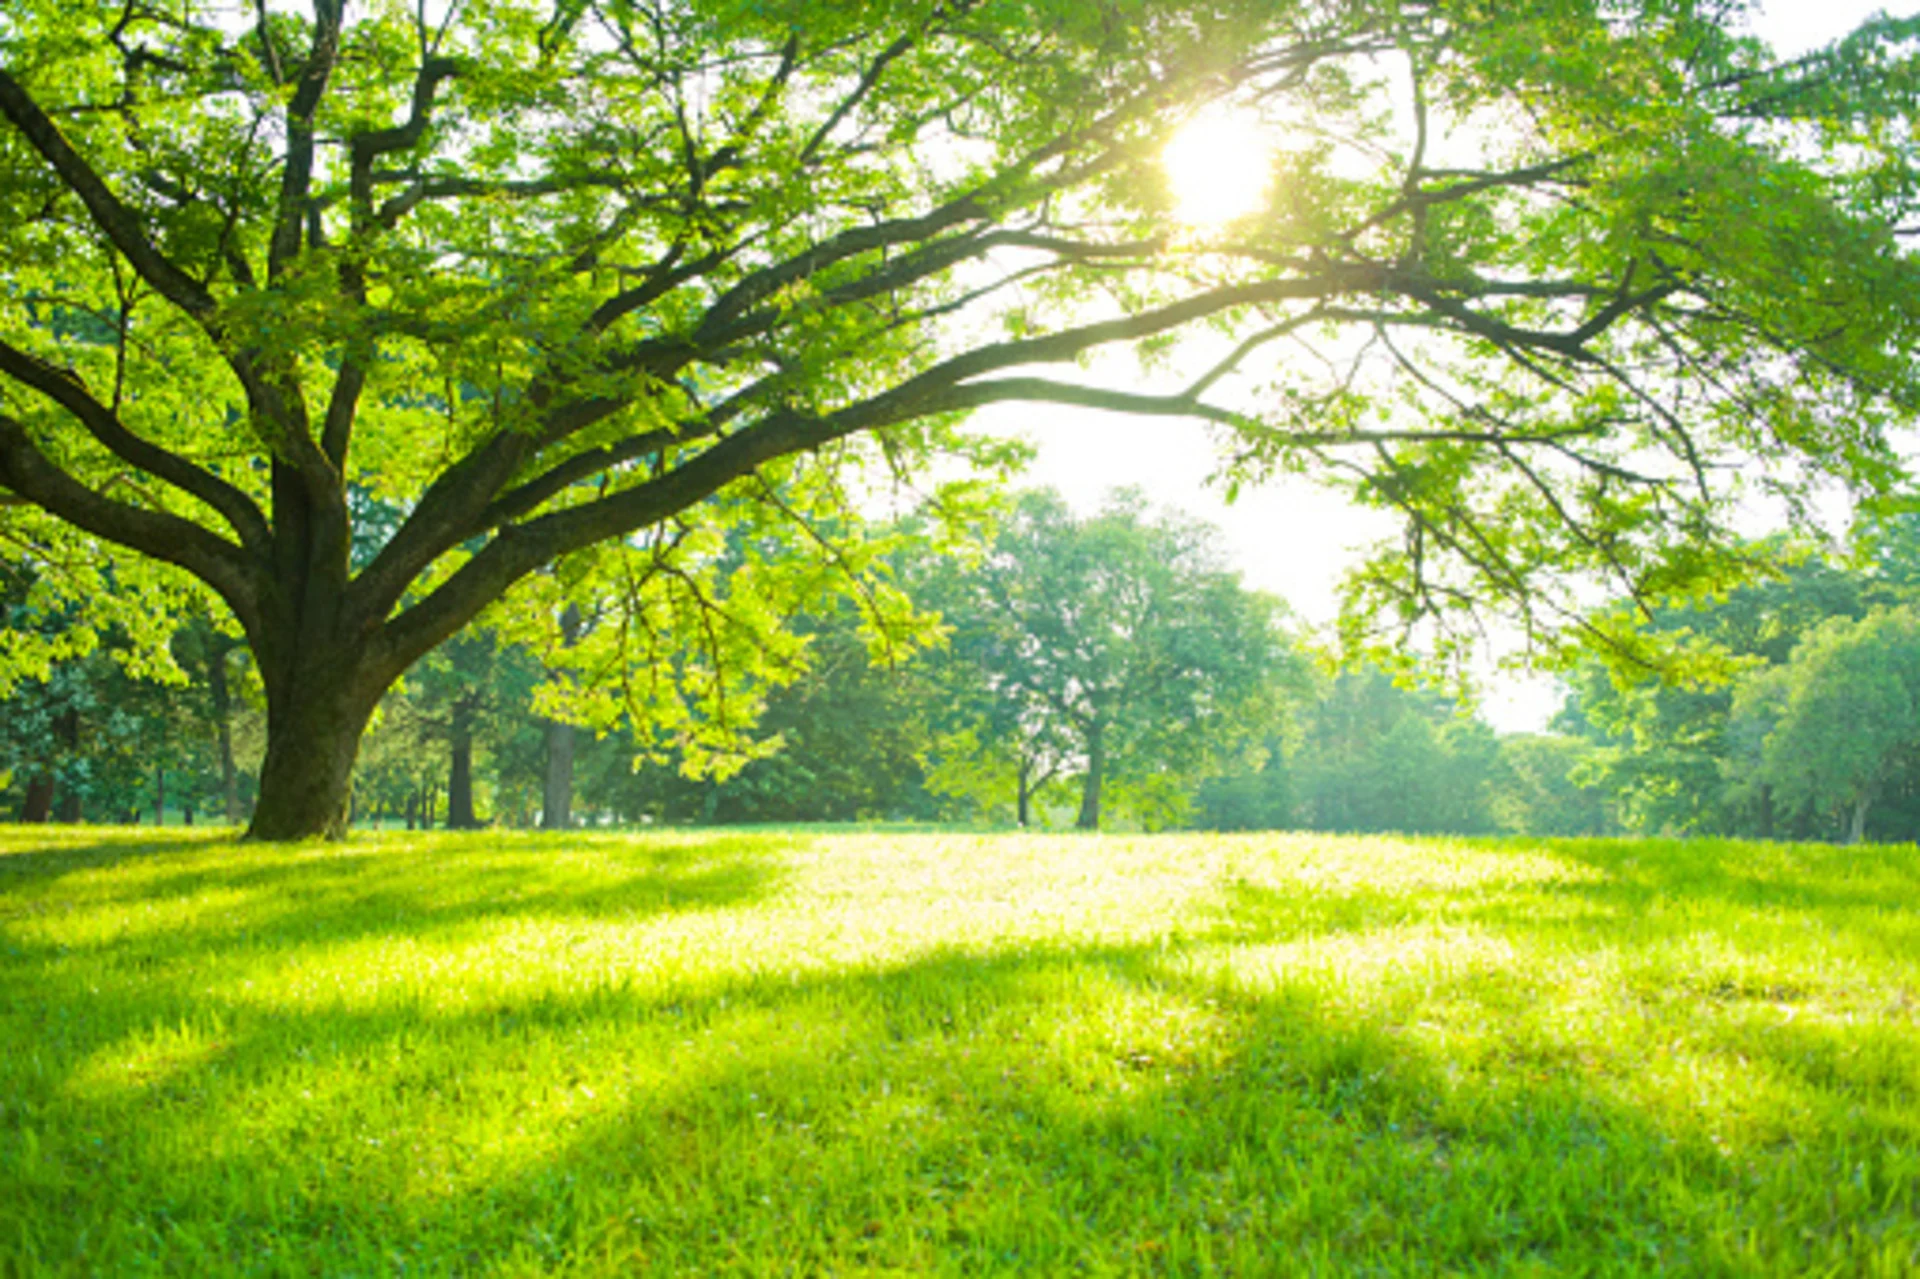 People living in green spaces seem to age slower - but there's a catch